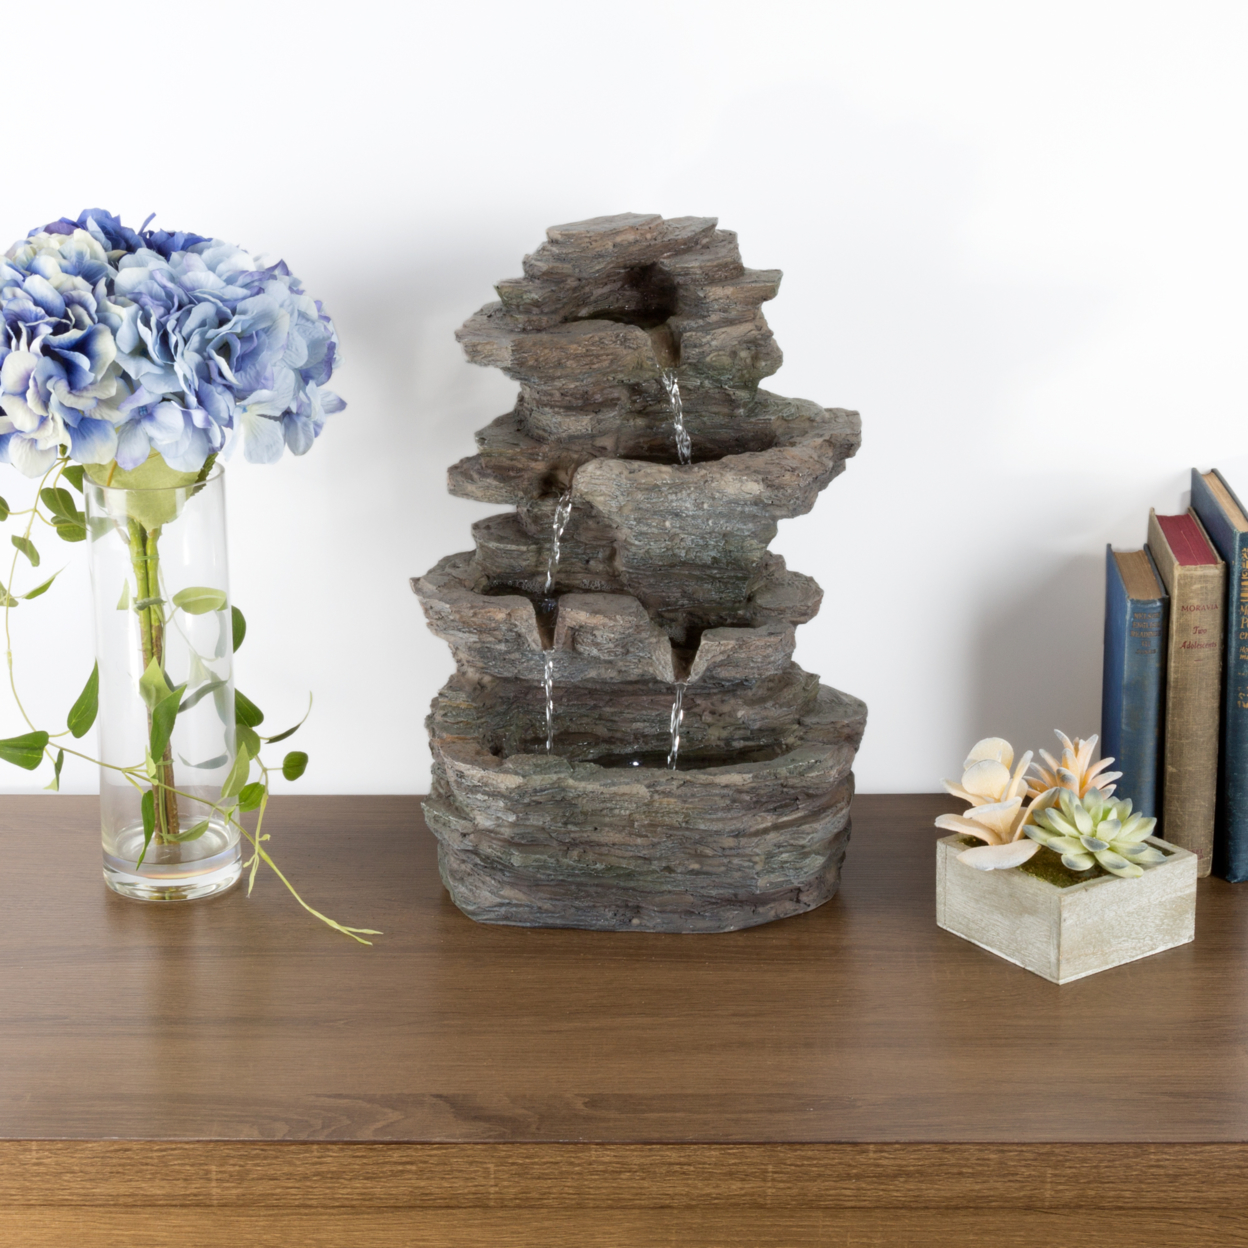 Tabletop Water Fountain With Cascading Rock Waterfall And LED Lights - Tiered Stone